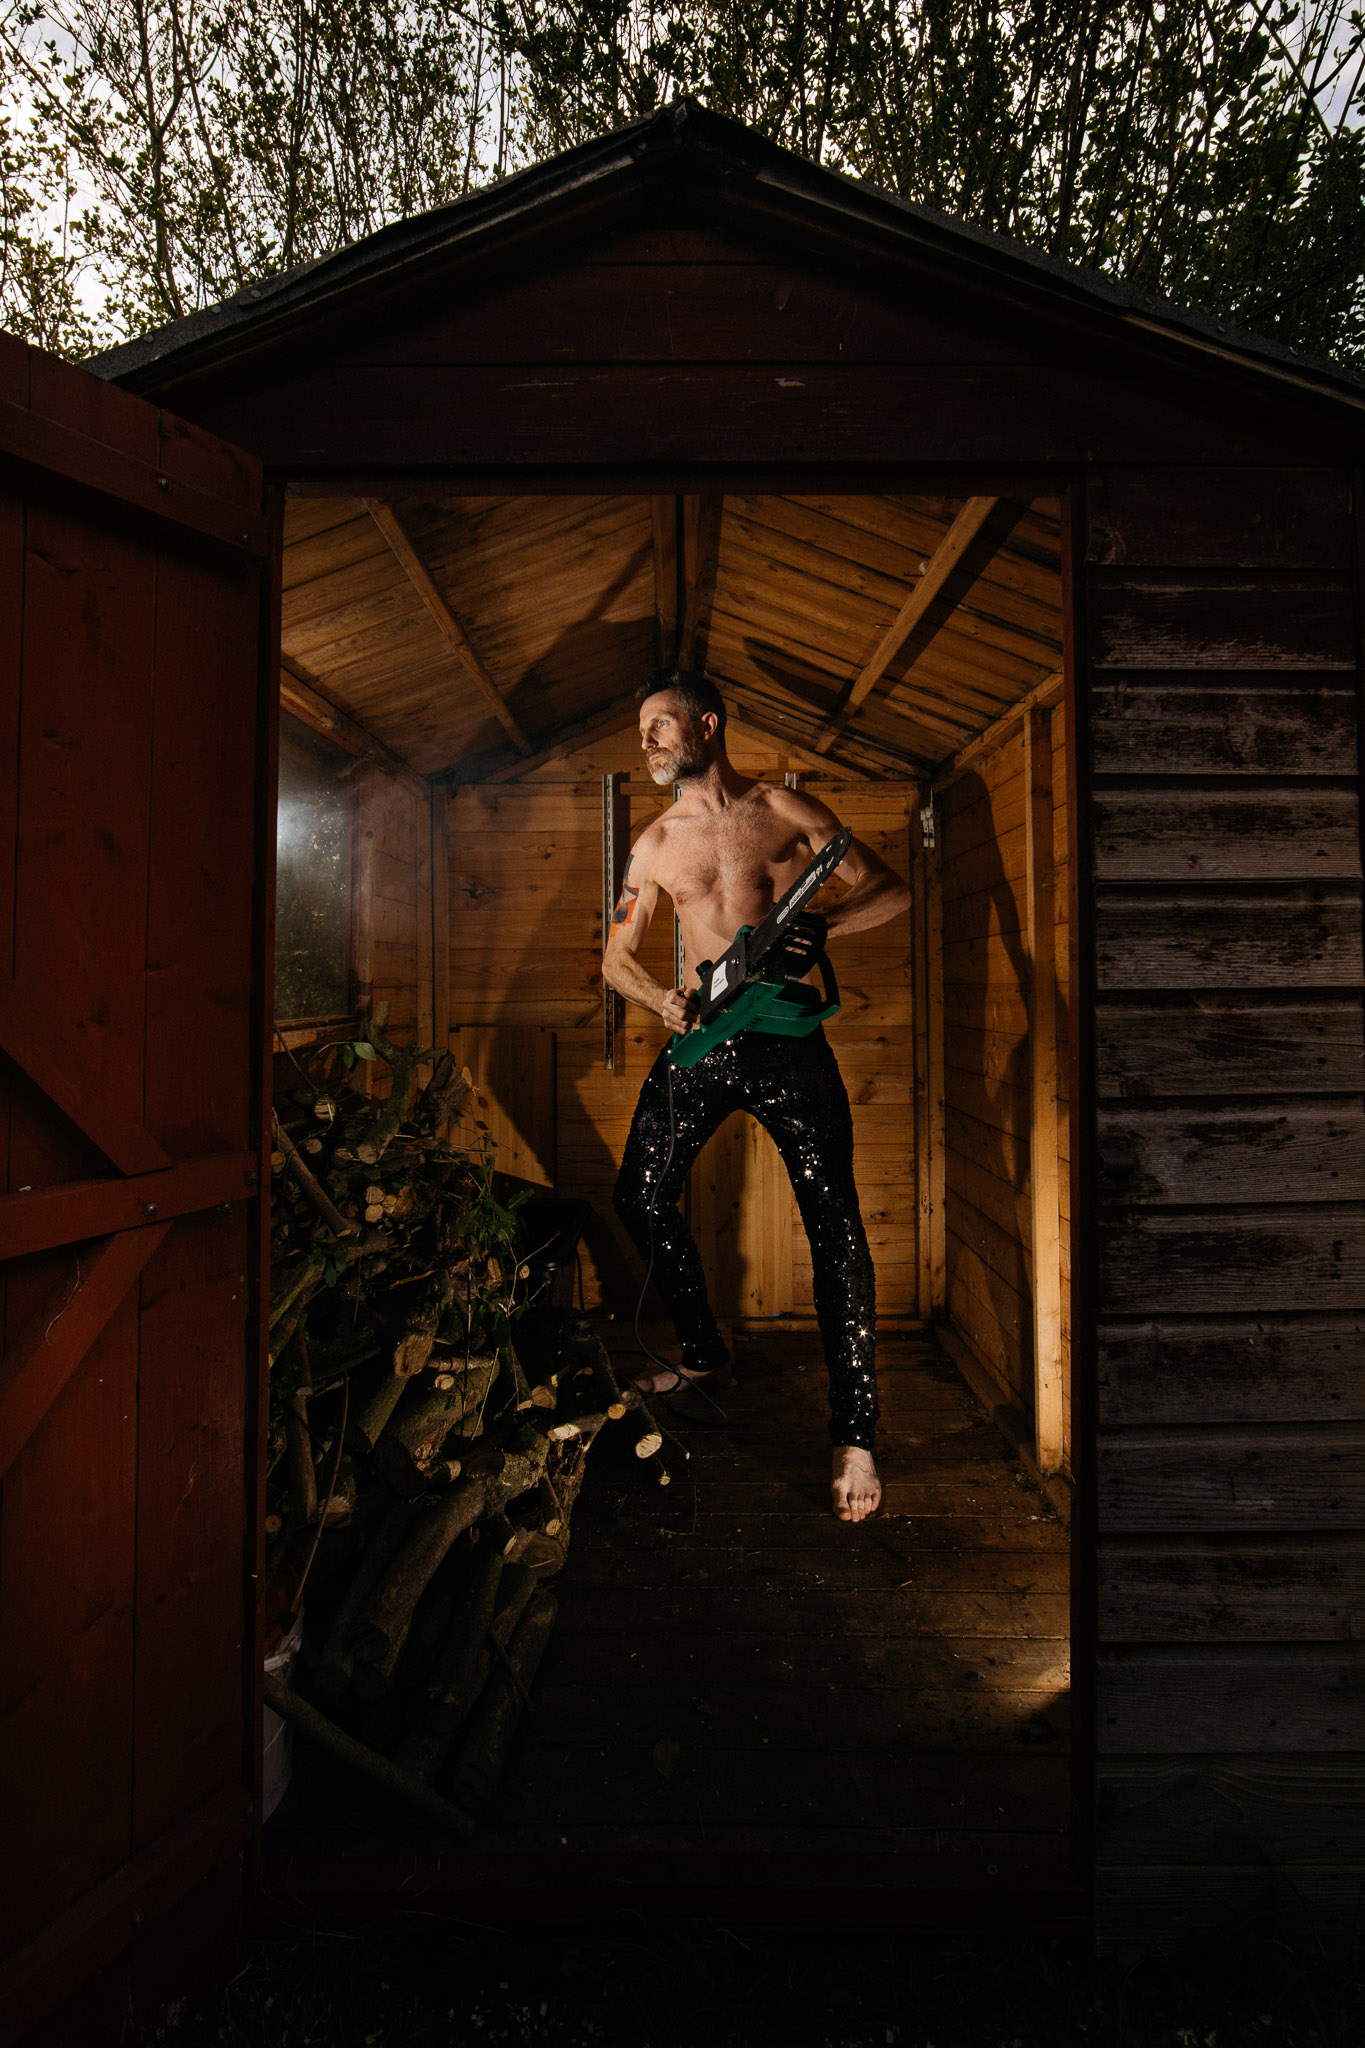 mike in shed with glitter trousers and chain saw